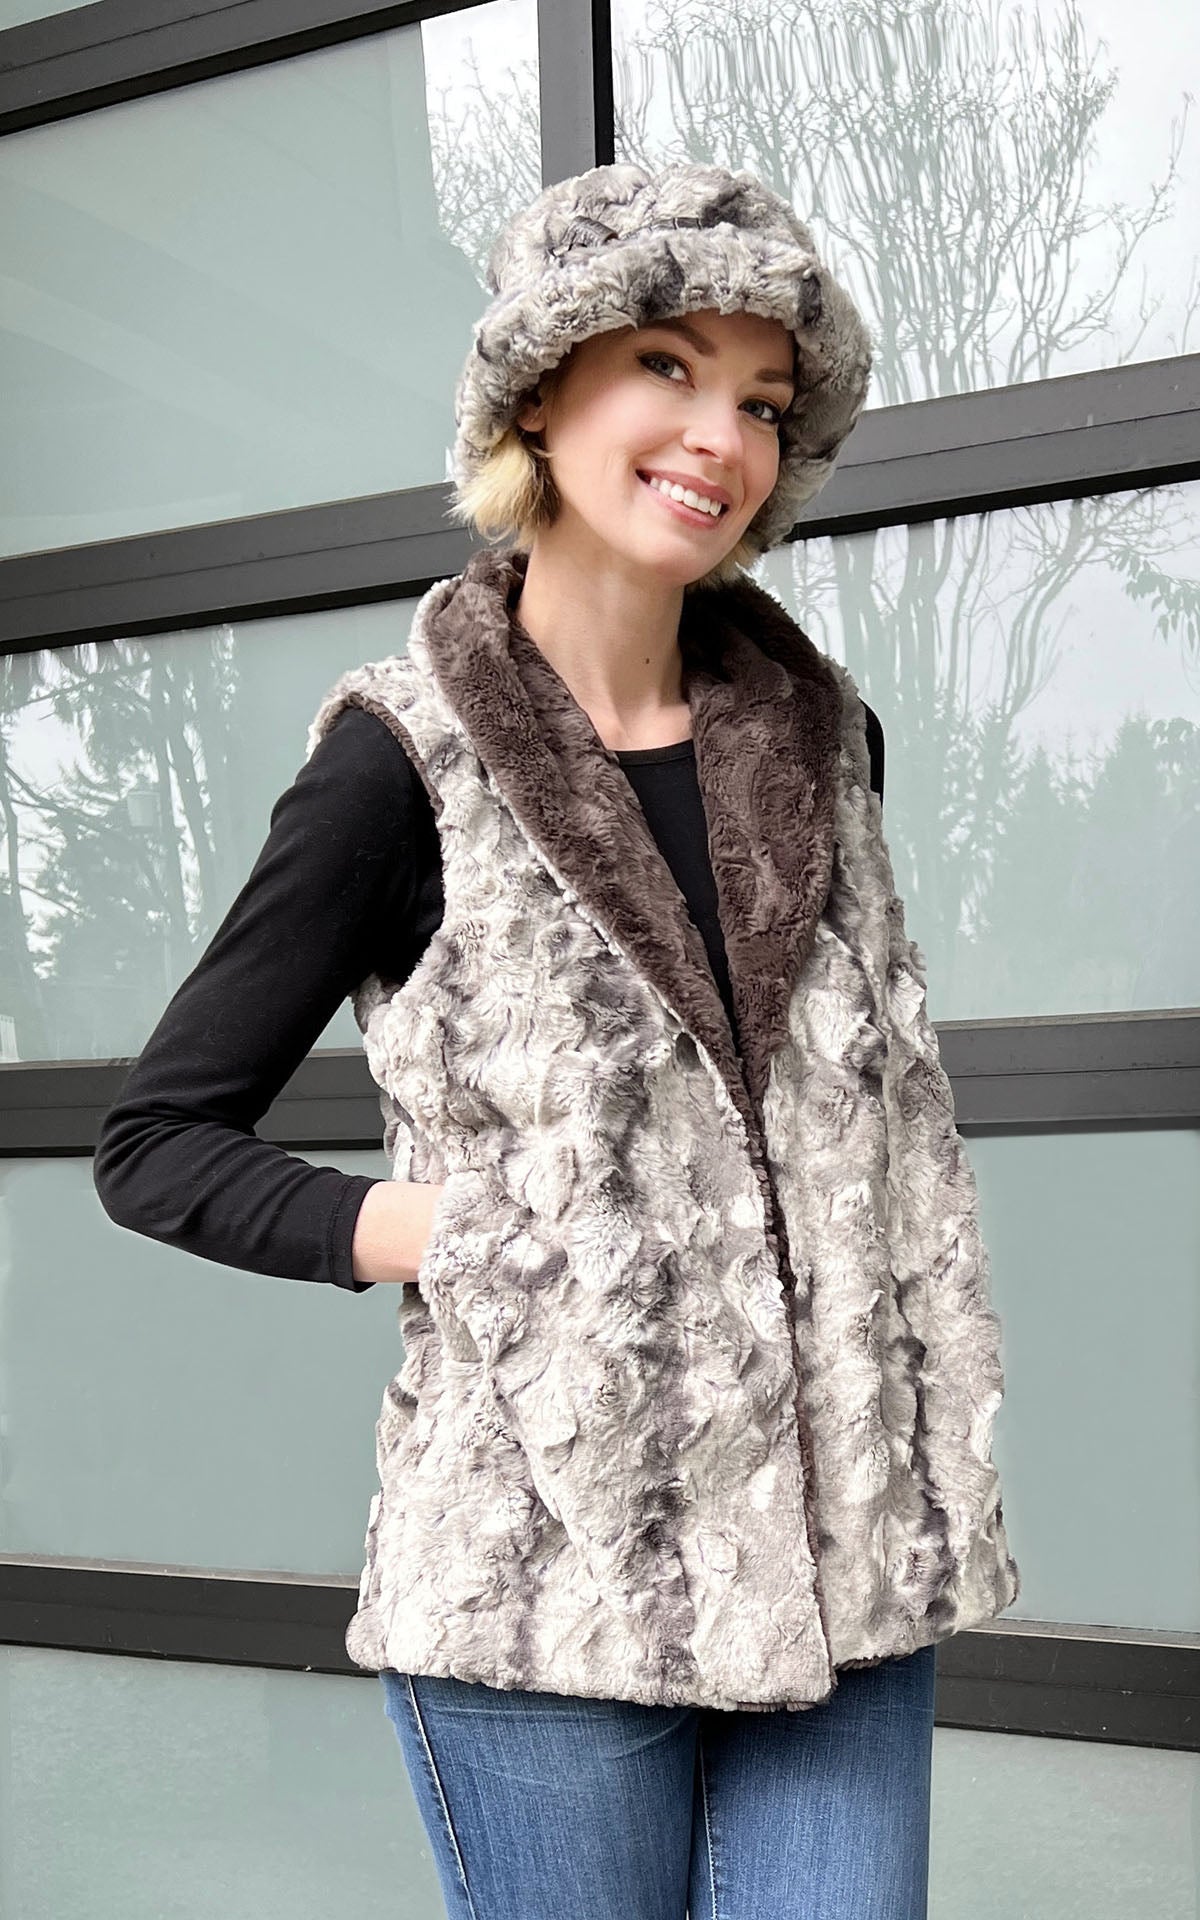 Shawl Collar Vest | White Water Faux Fur with Cuddly Gray Lining | Handmade Seattle, WA, USA by Pandemonium Millinery